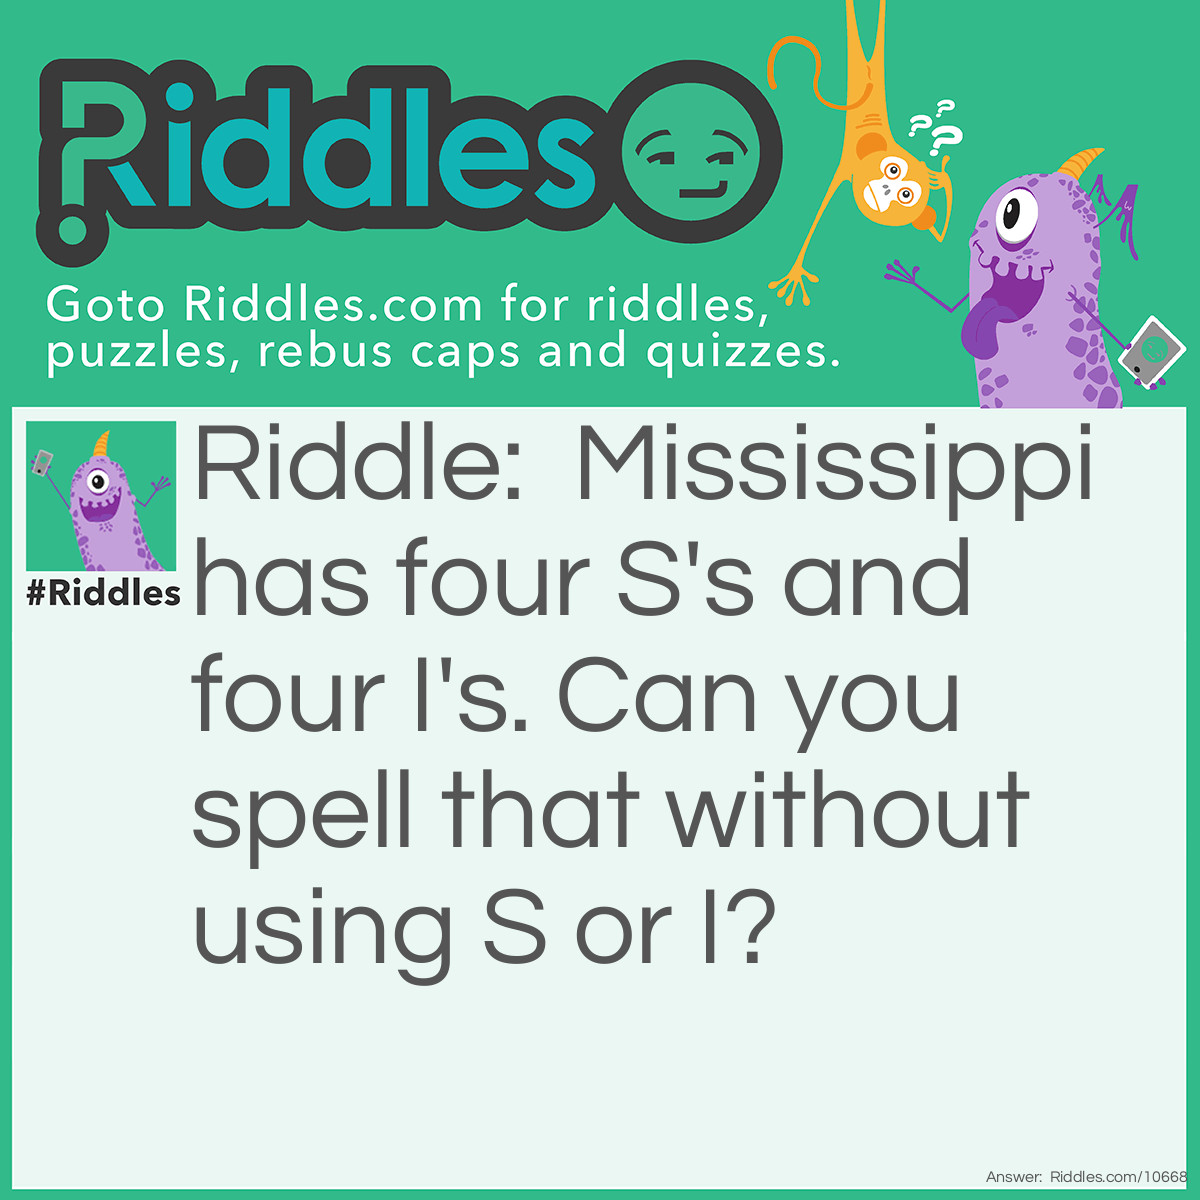 Riddle: Mississippi has four S's and four I's. Can you spell that without using S or I? Answer: T-H-A-T!